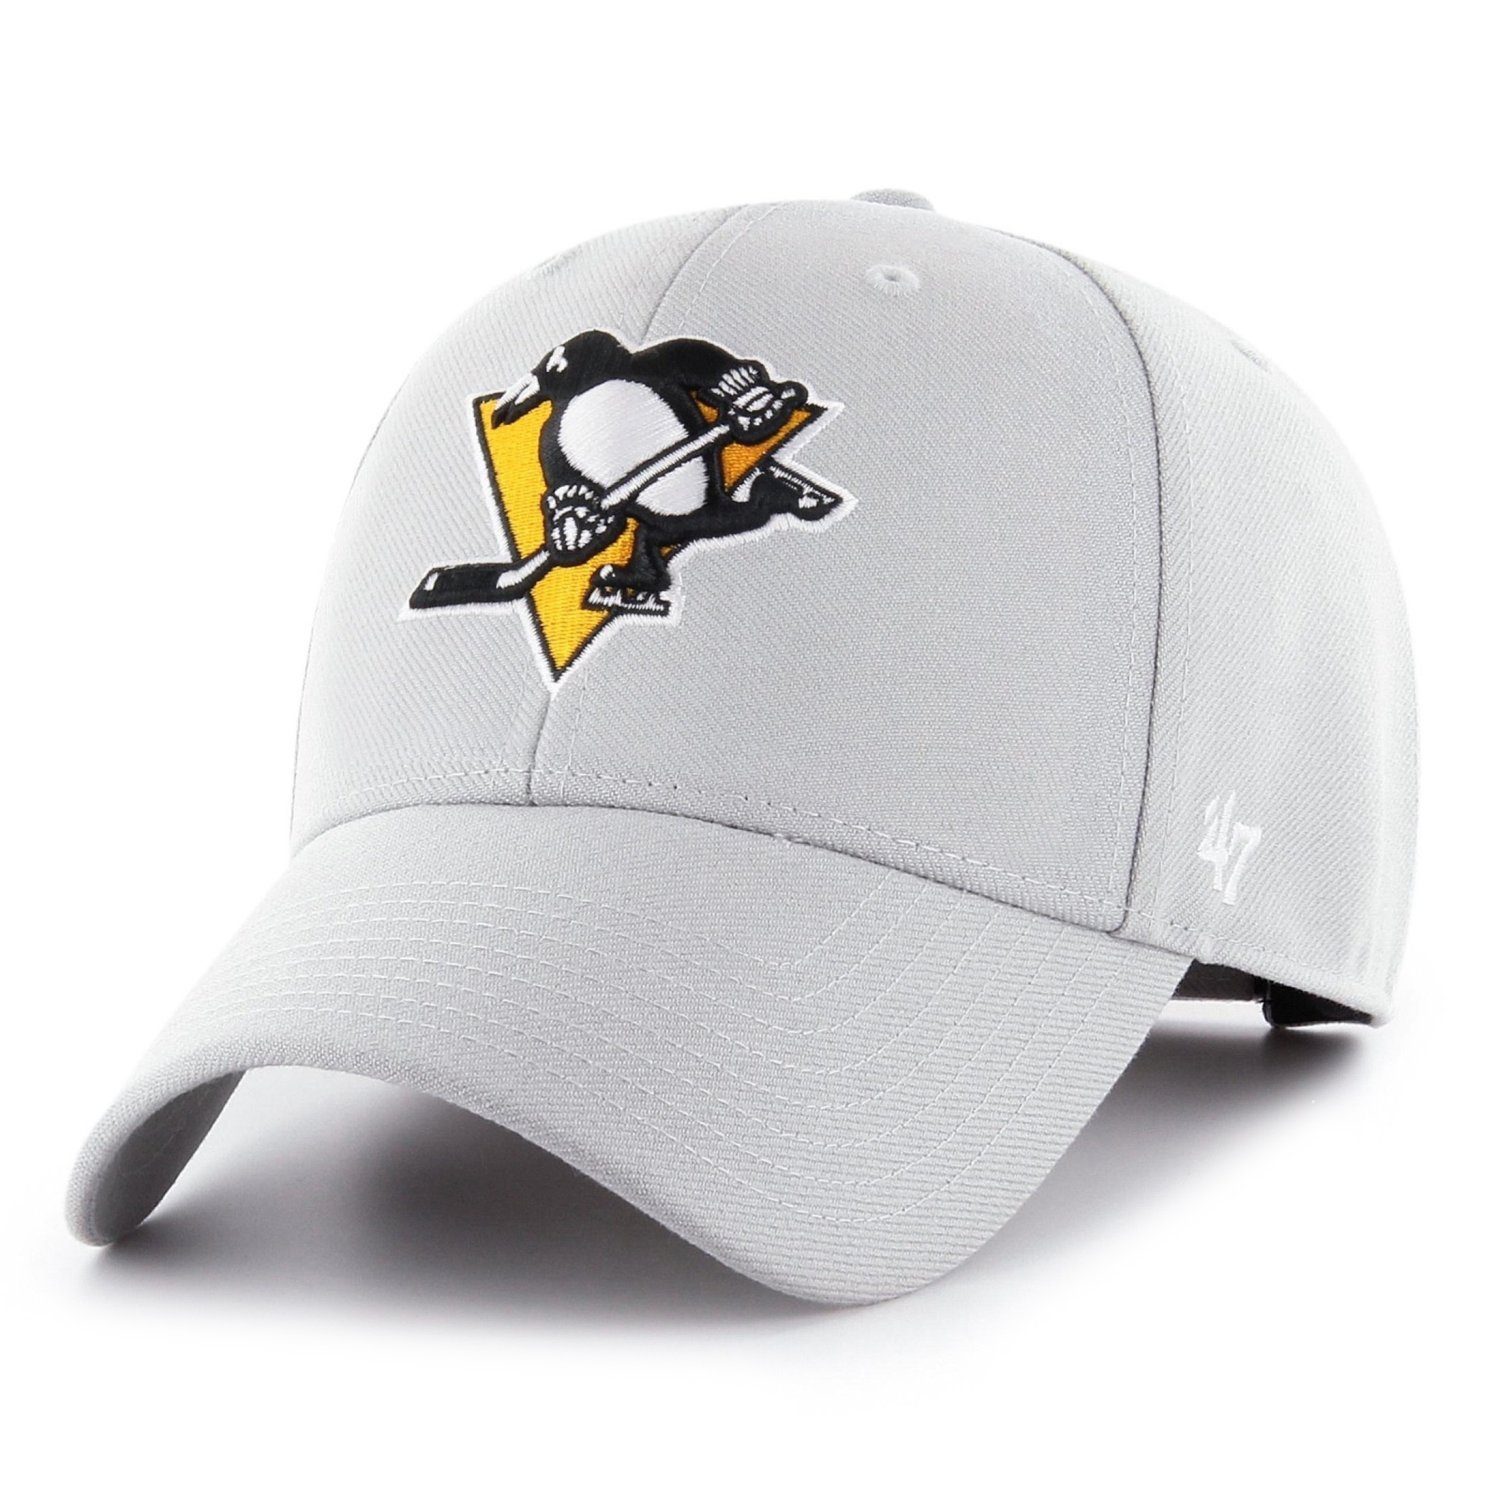 Cap Relaxed NHL Fit Brand '47 Pittsburgh Trucker Penguins